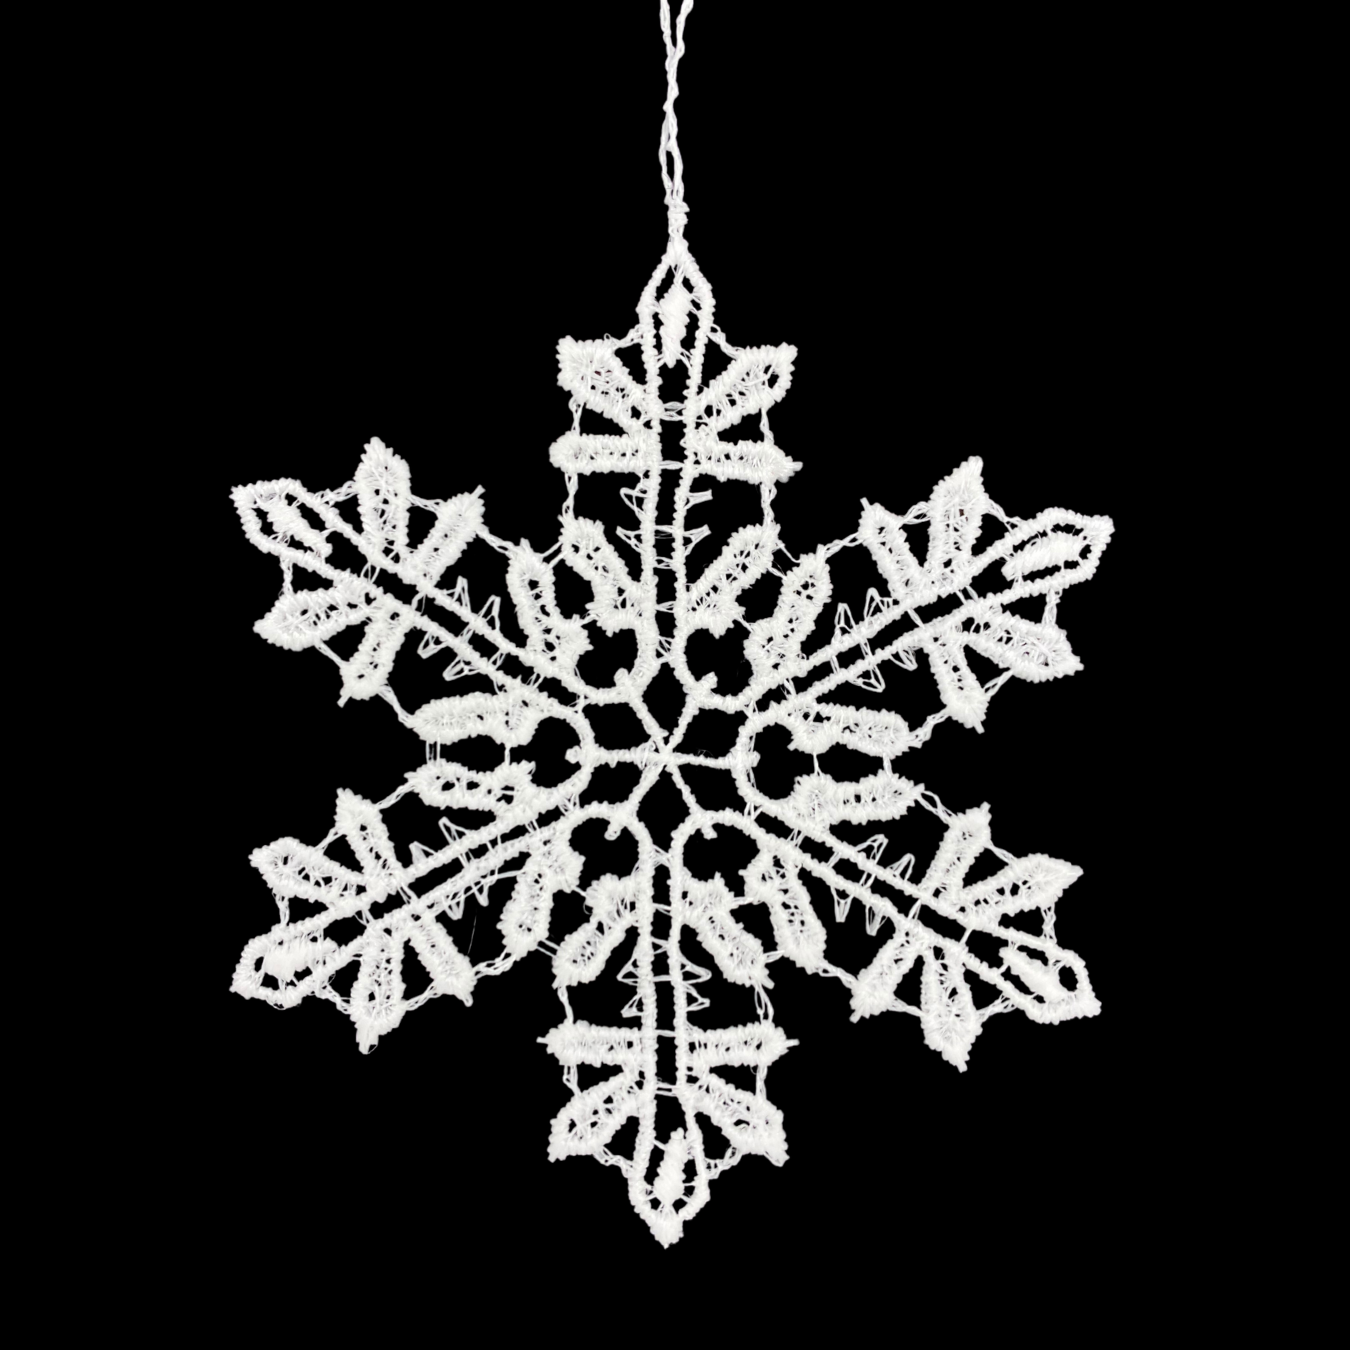 Lace Snowstar with Six Rays Ornament by StiVoTex Vogel